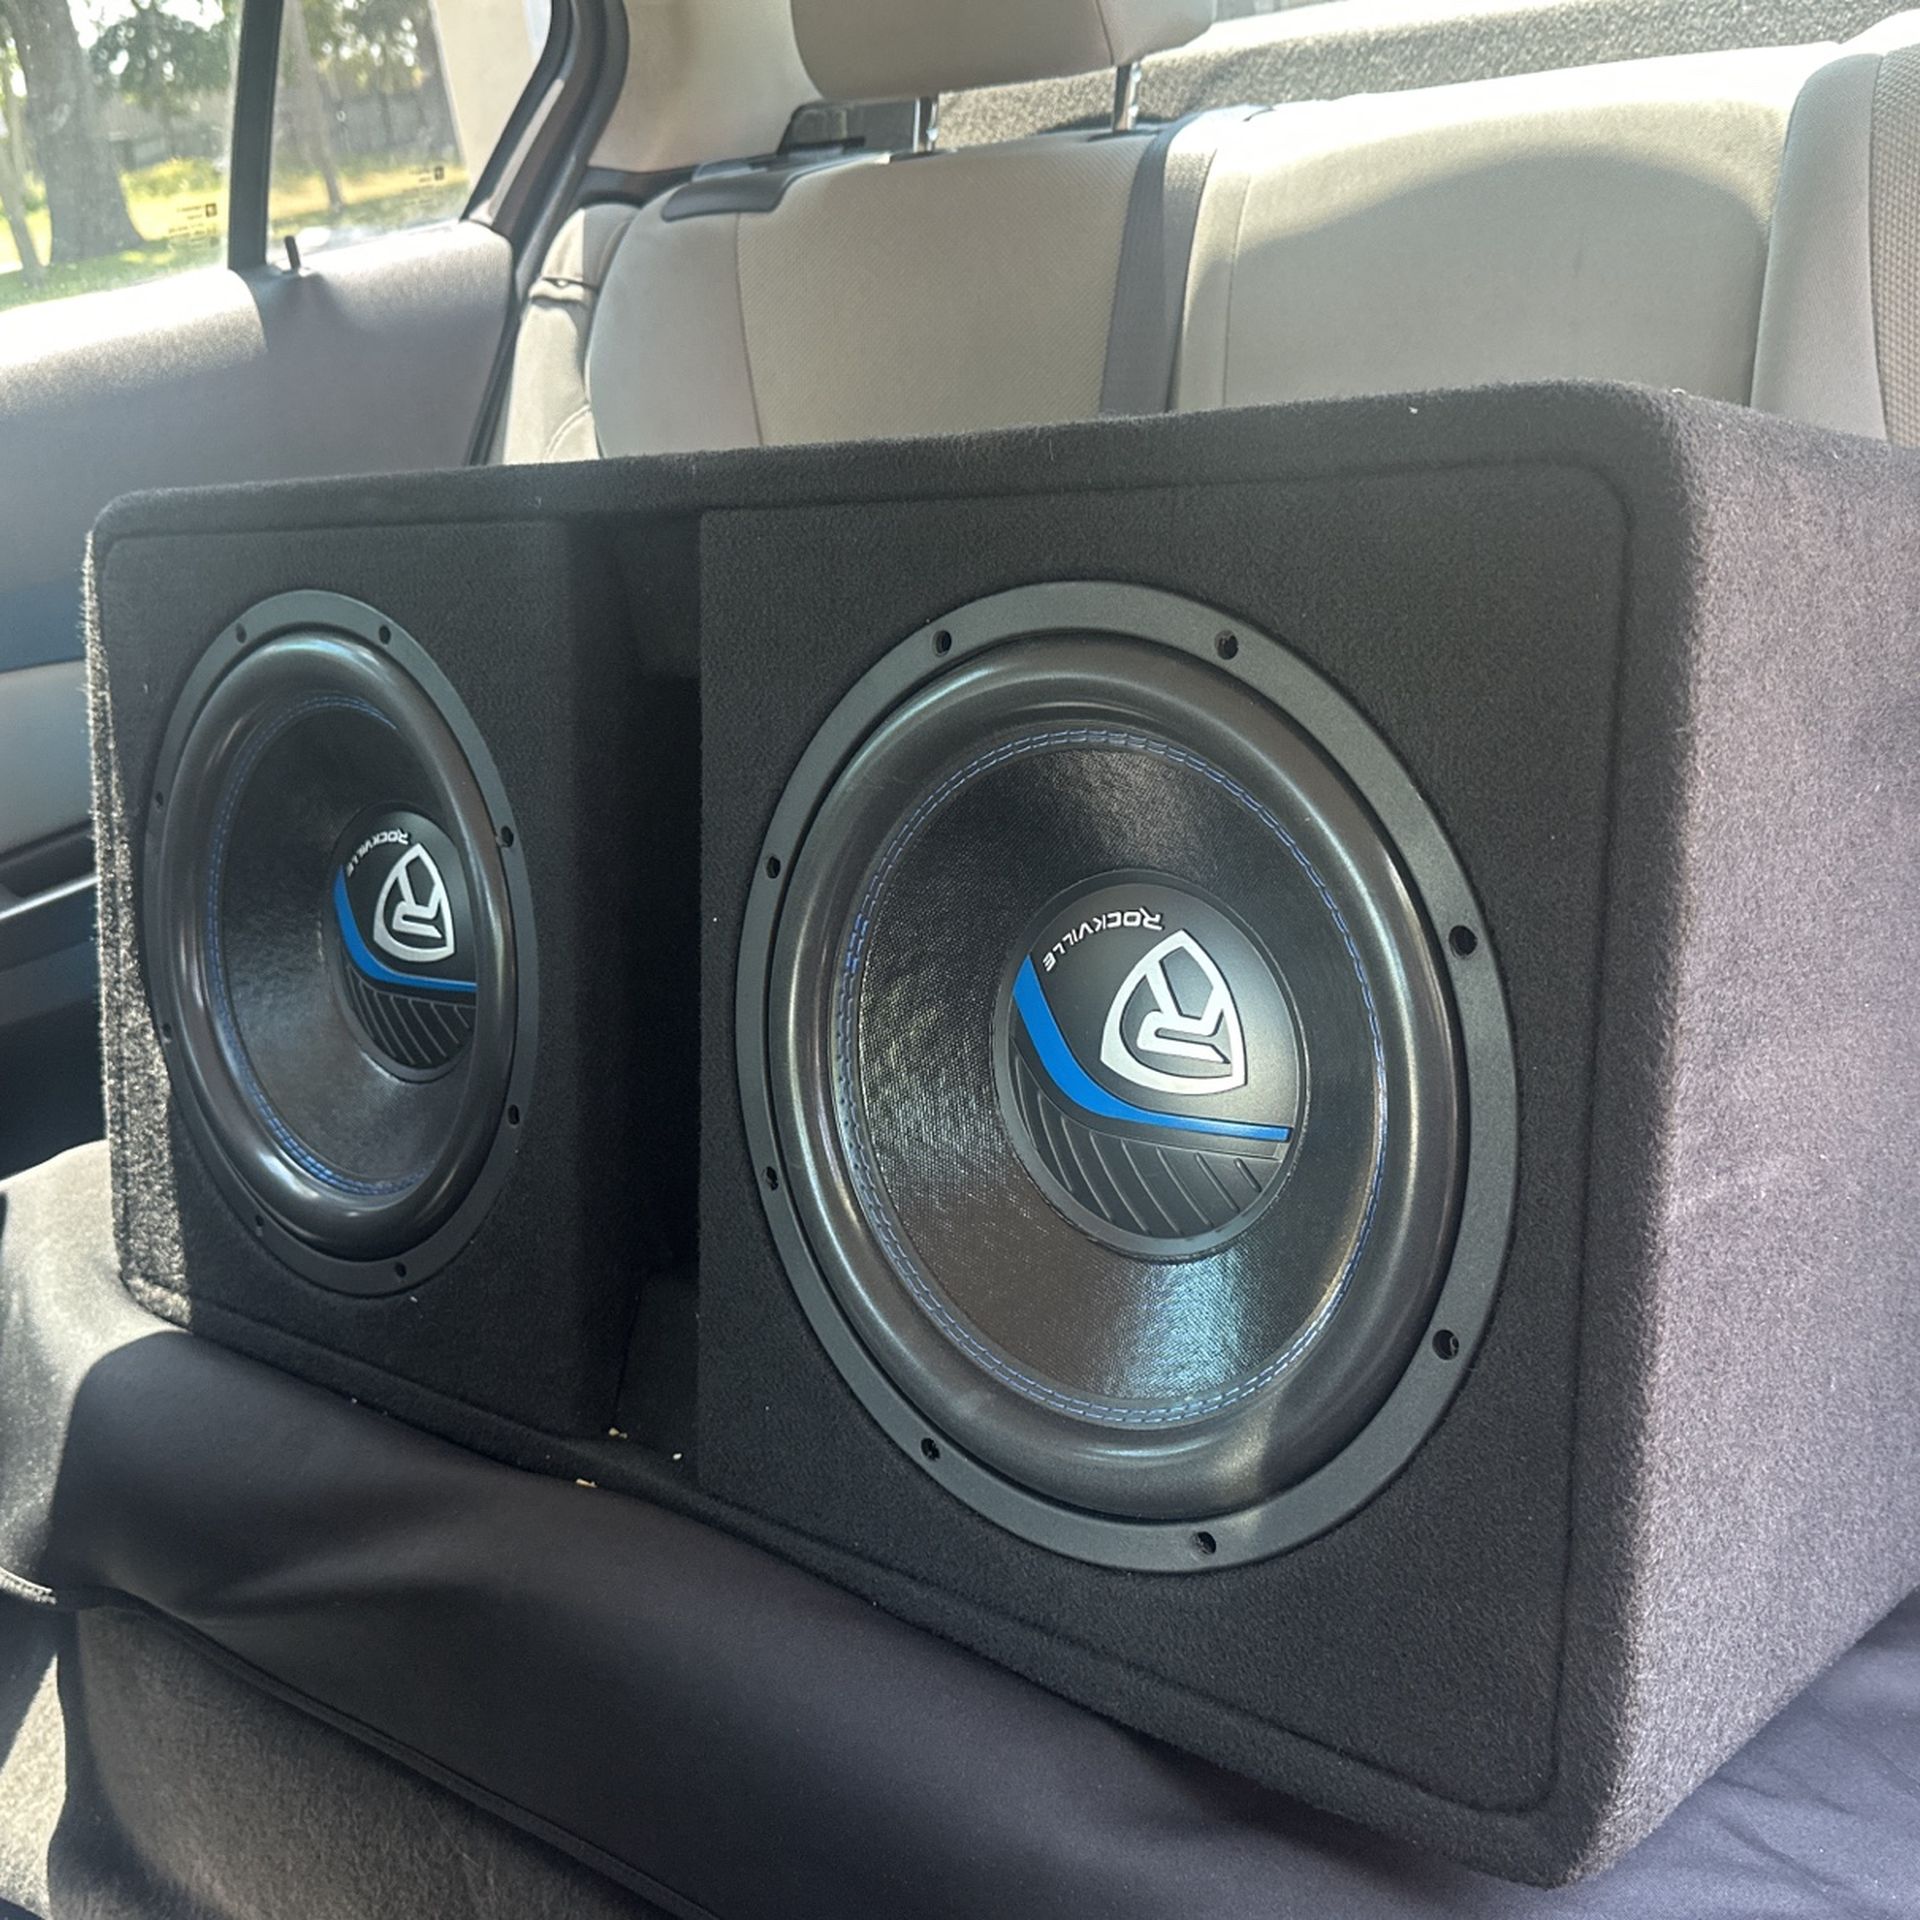 Rockville 2 12s Working Subwoofers